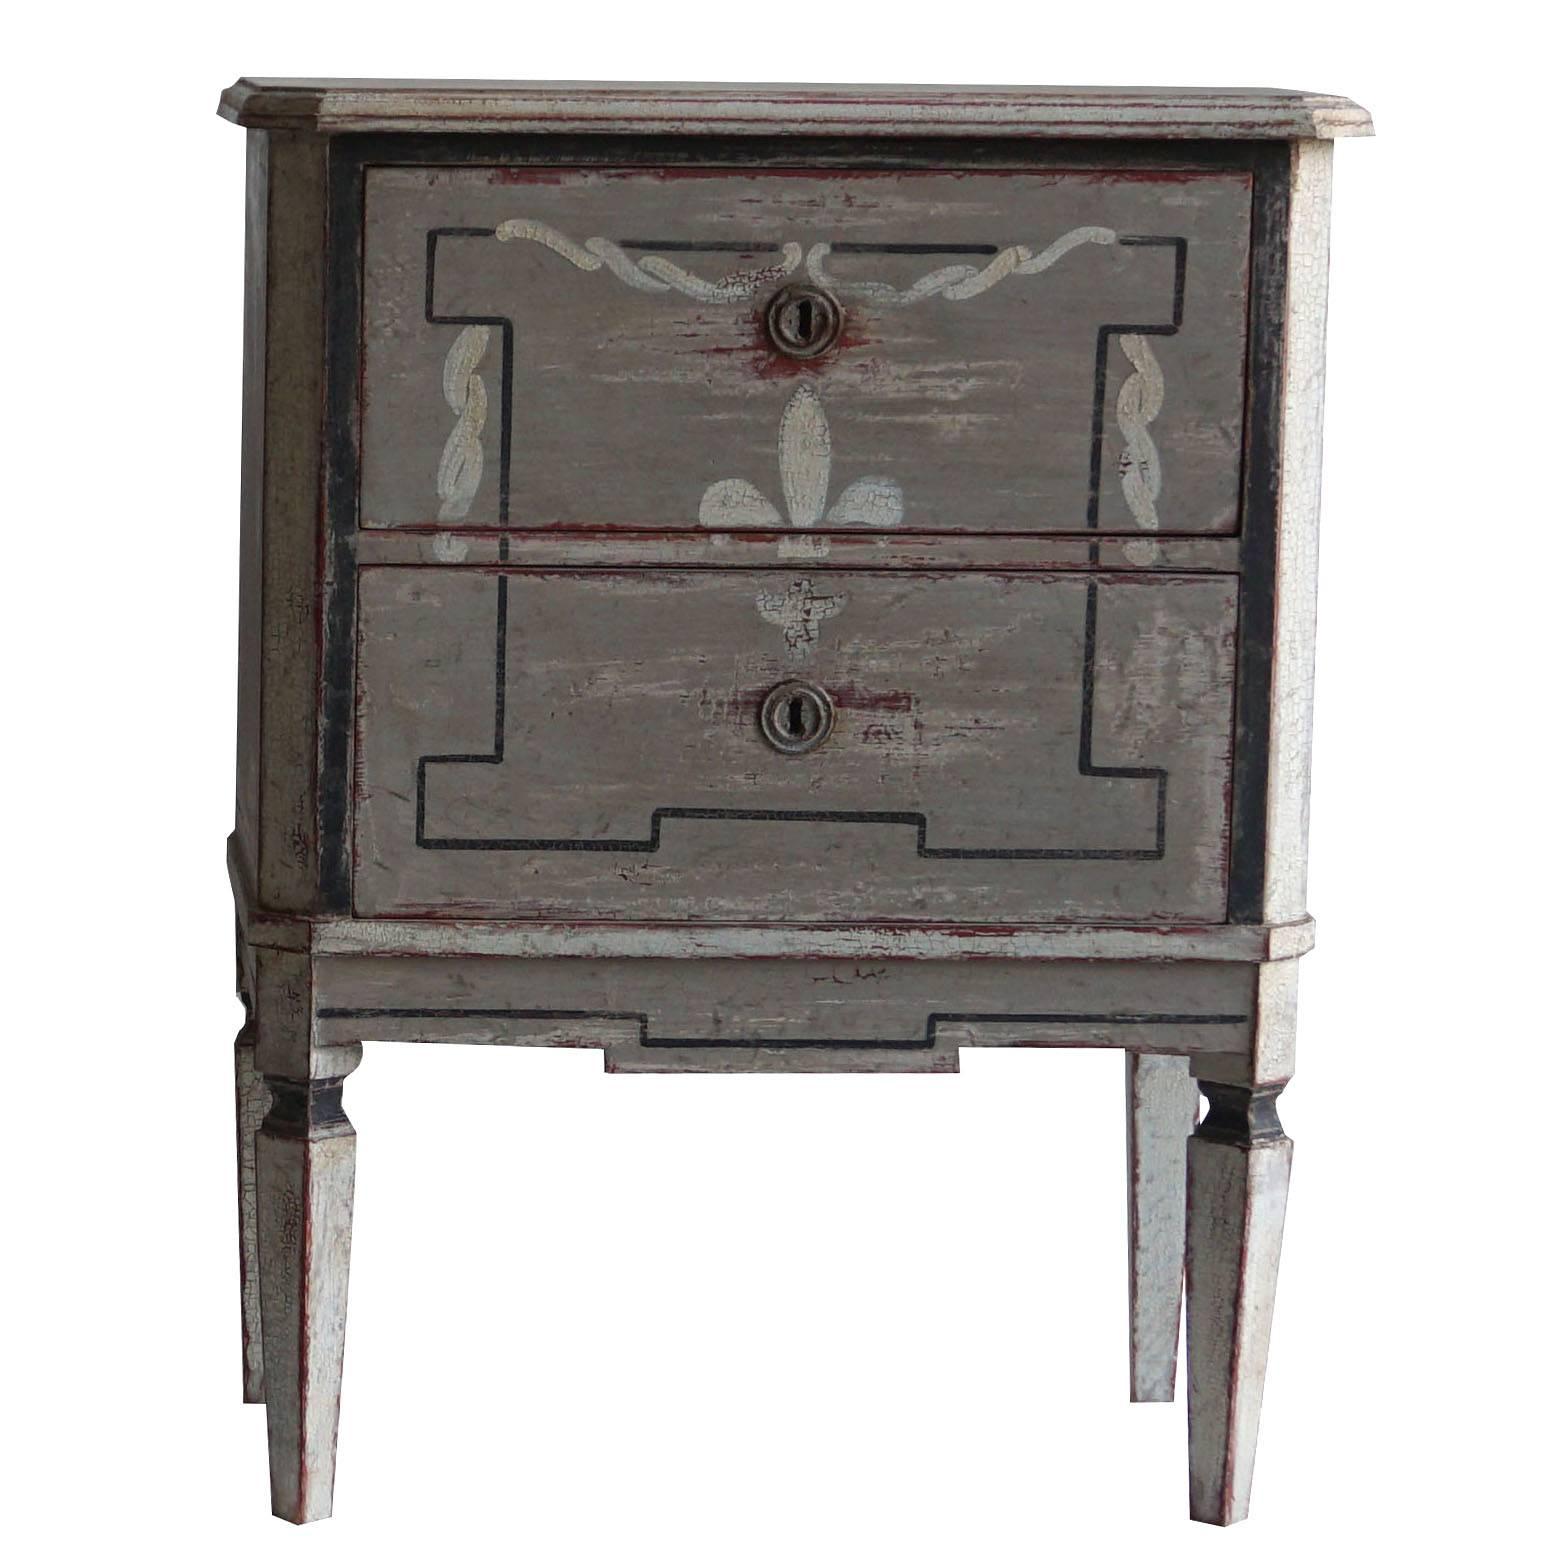 Late 19th Century Pair of Gustavian Chests from Sweden